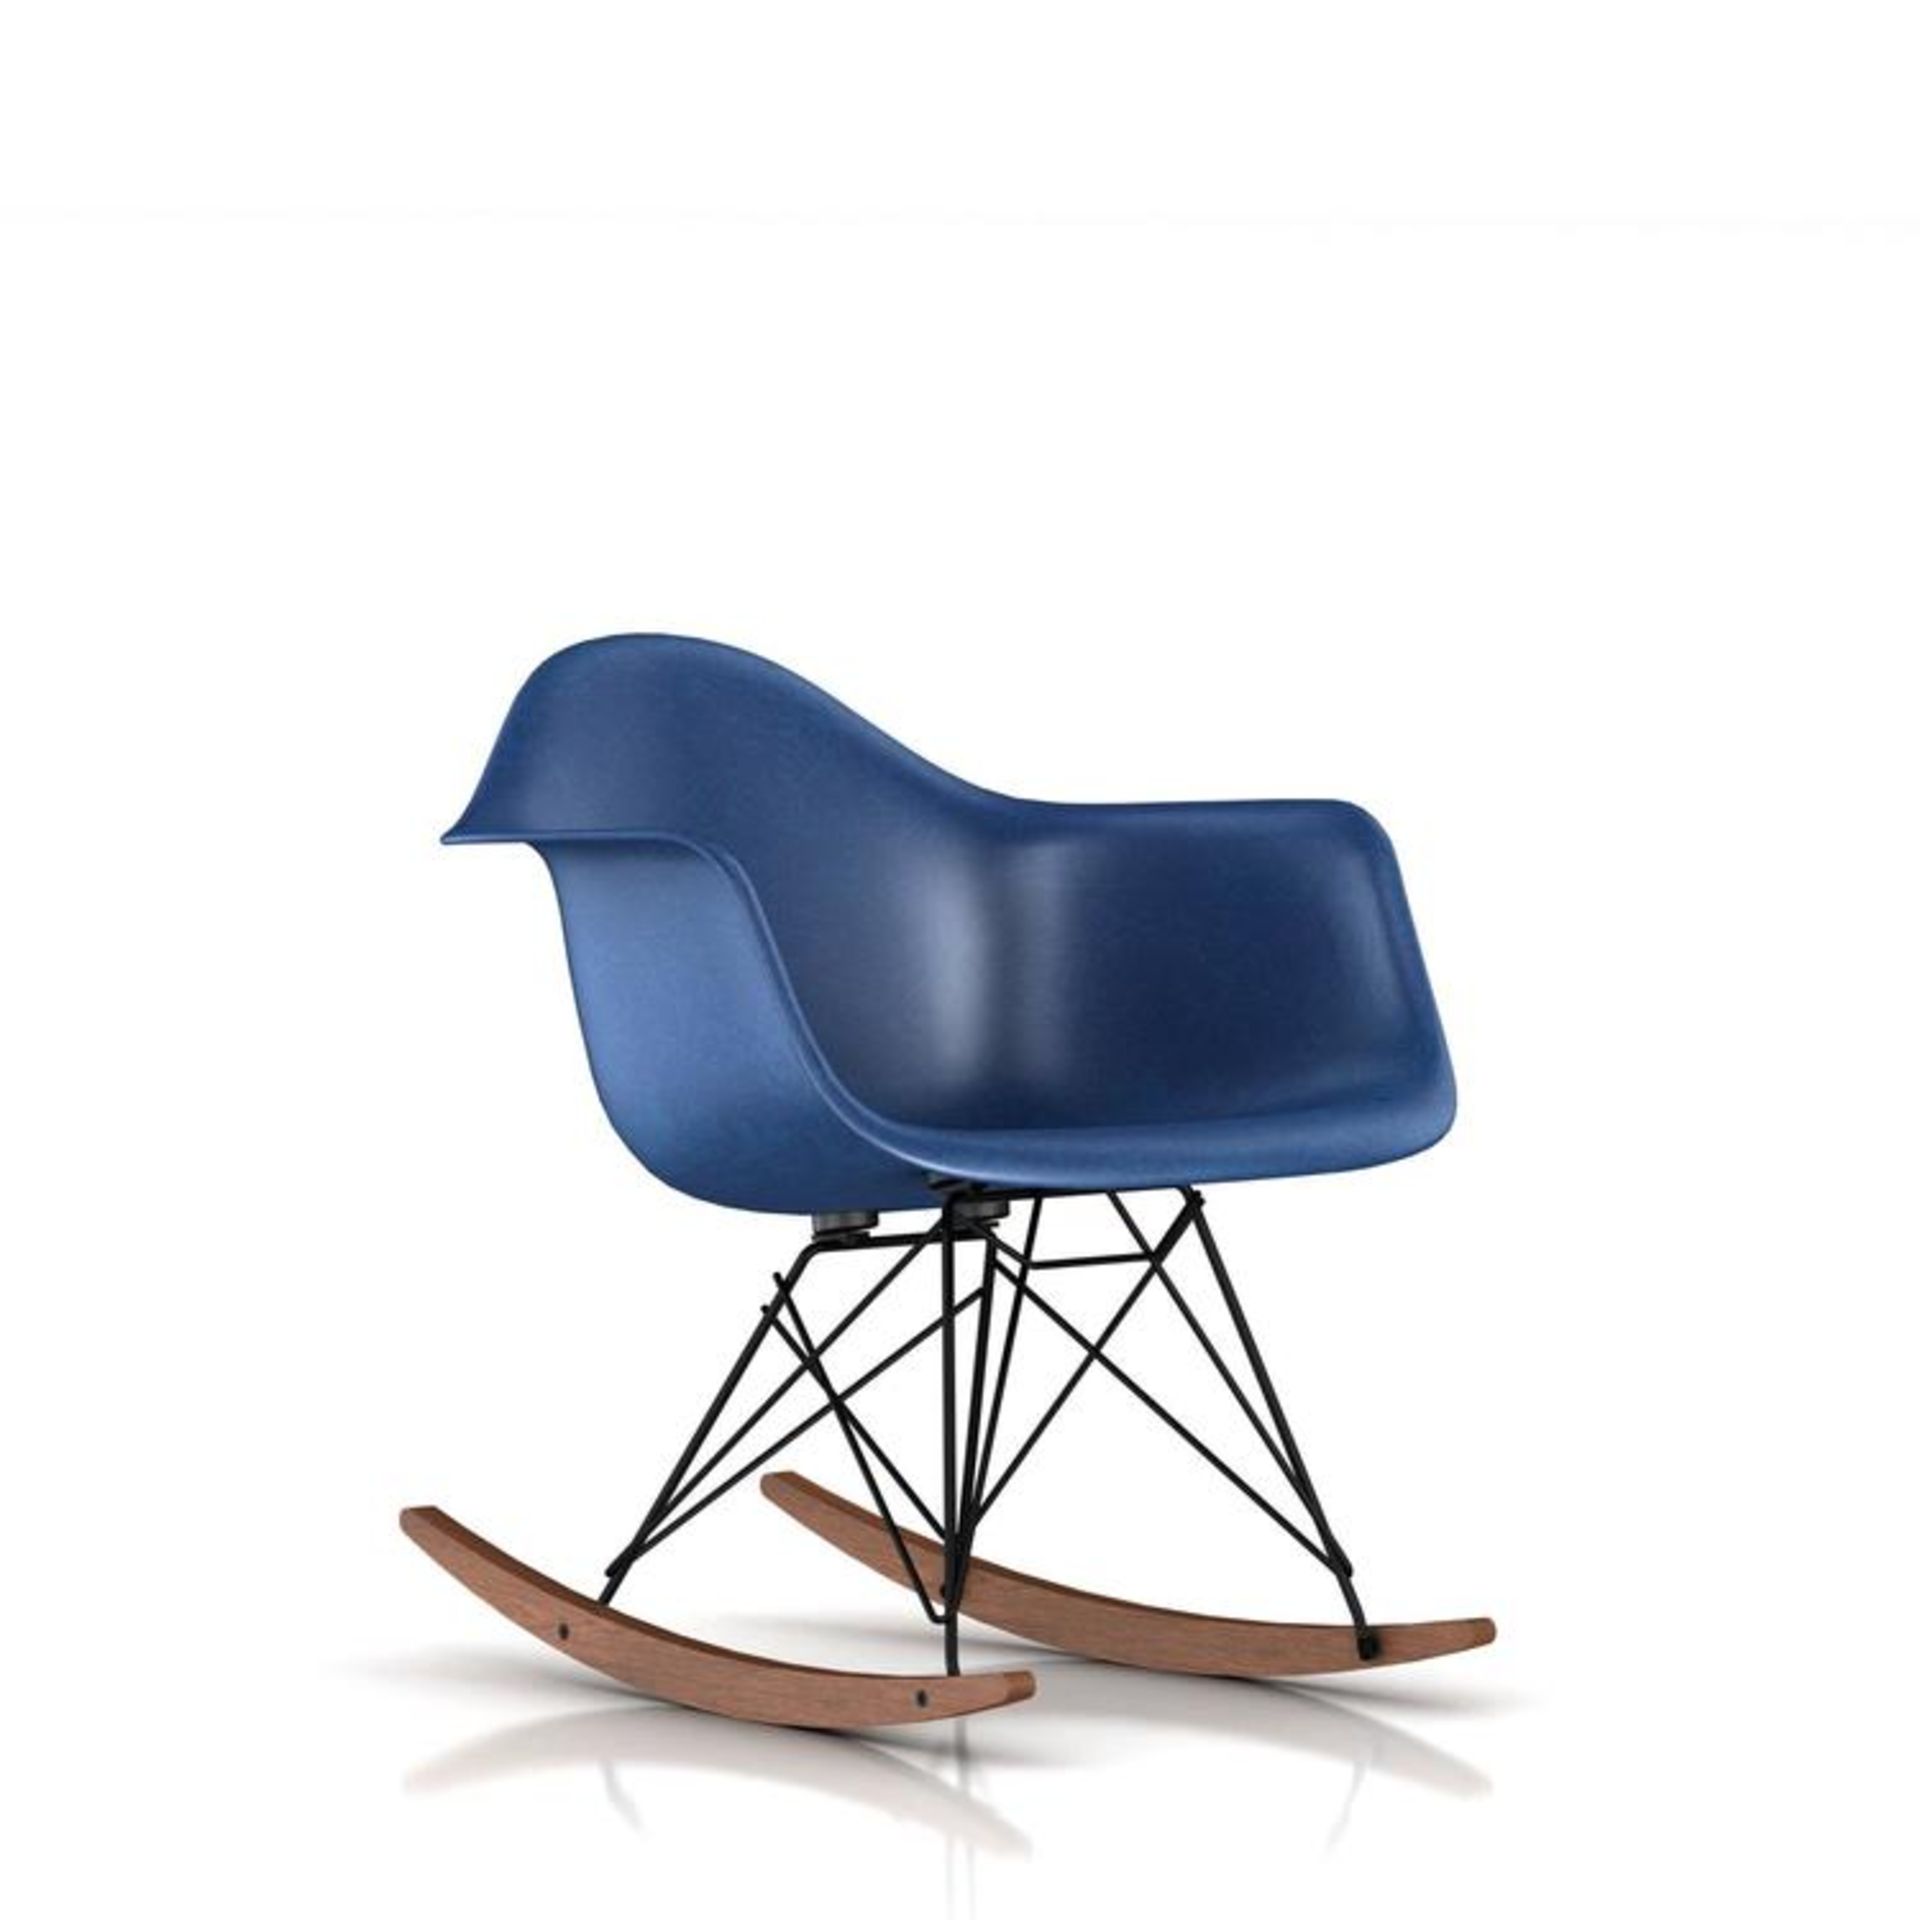 X1 BOXED BRAND NEW, EAMES STYLE ROCKER ARM CHAIR, BLUE, RRP-£149.99 (MD-CHAIR)